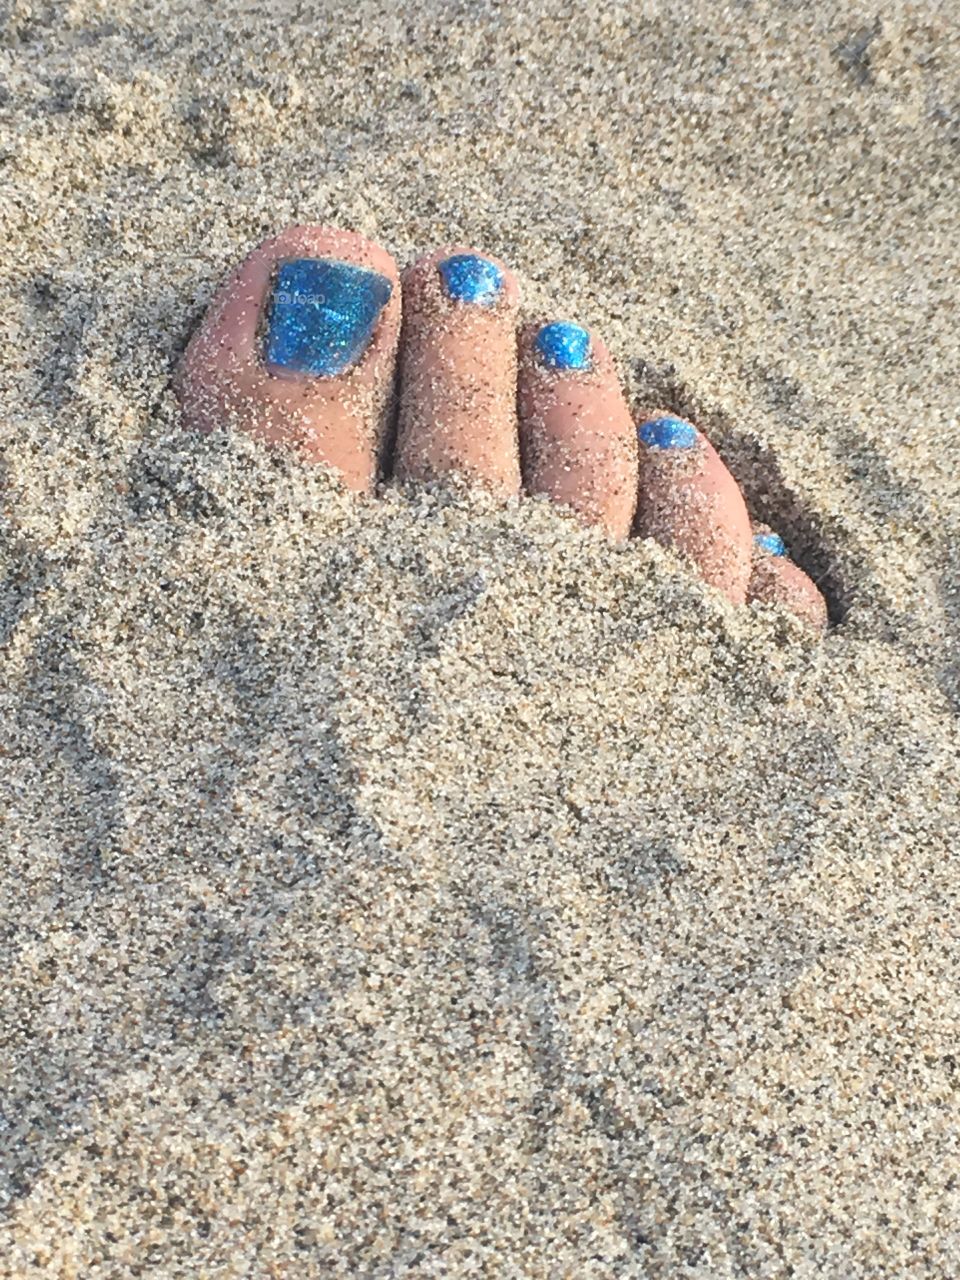 Toes buried in sand